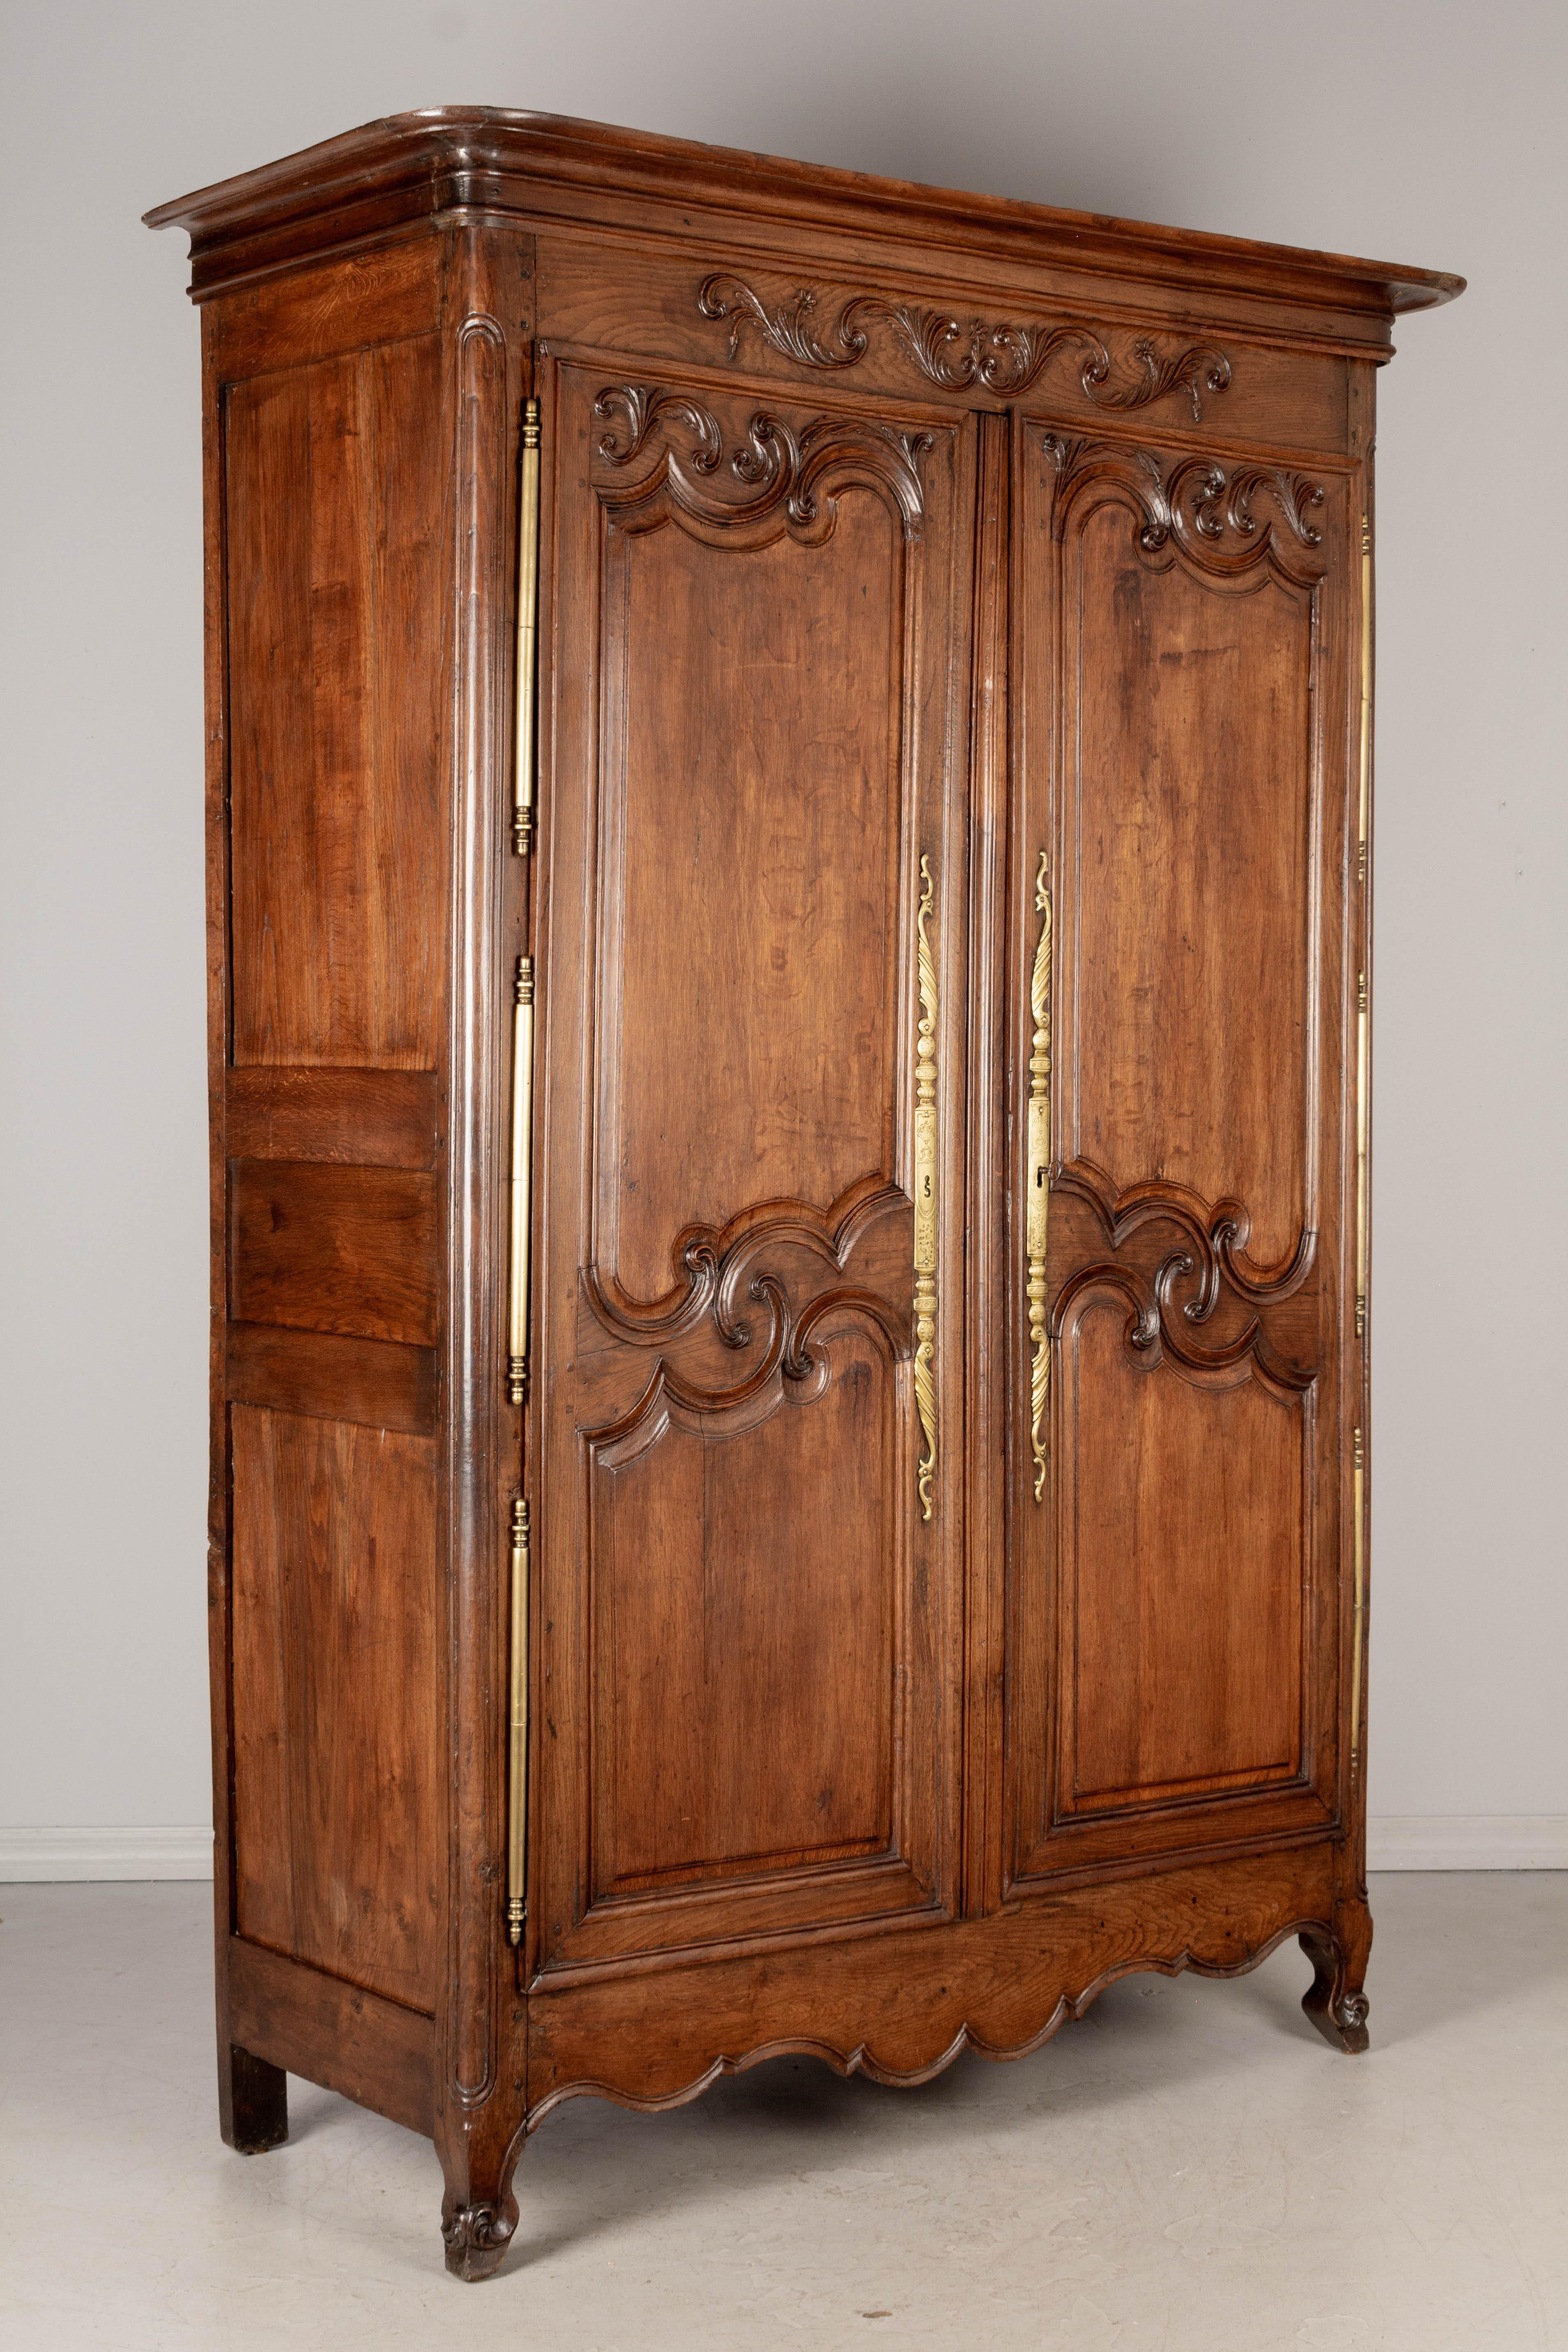 An 18th century French armoire from Normandy made of solid oak with nice had carved details. Original brass hardware with working lock and key. Interior has one original shelf with three drawers and two new shelves. Waxed patina. Normal minor